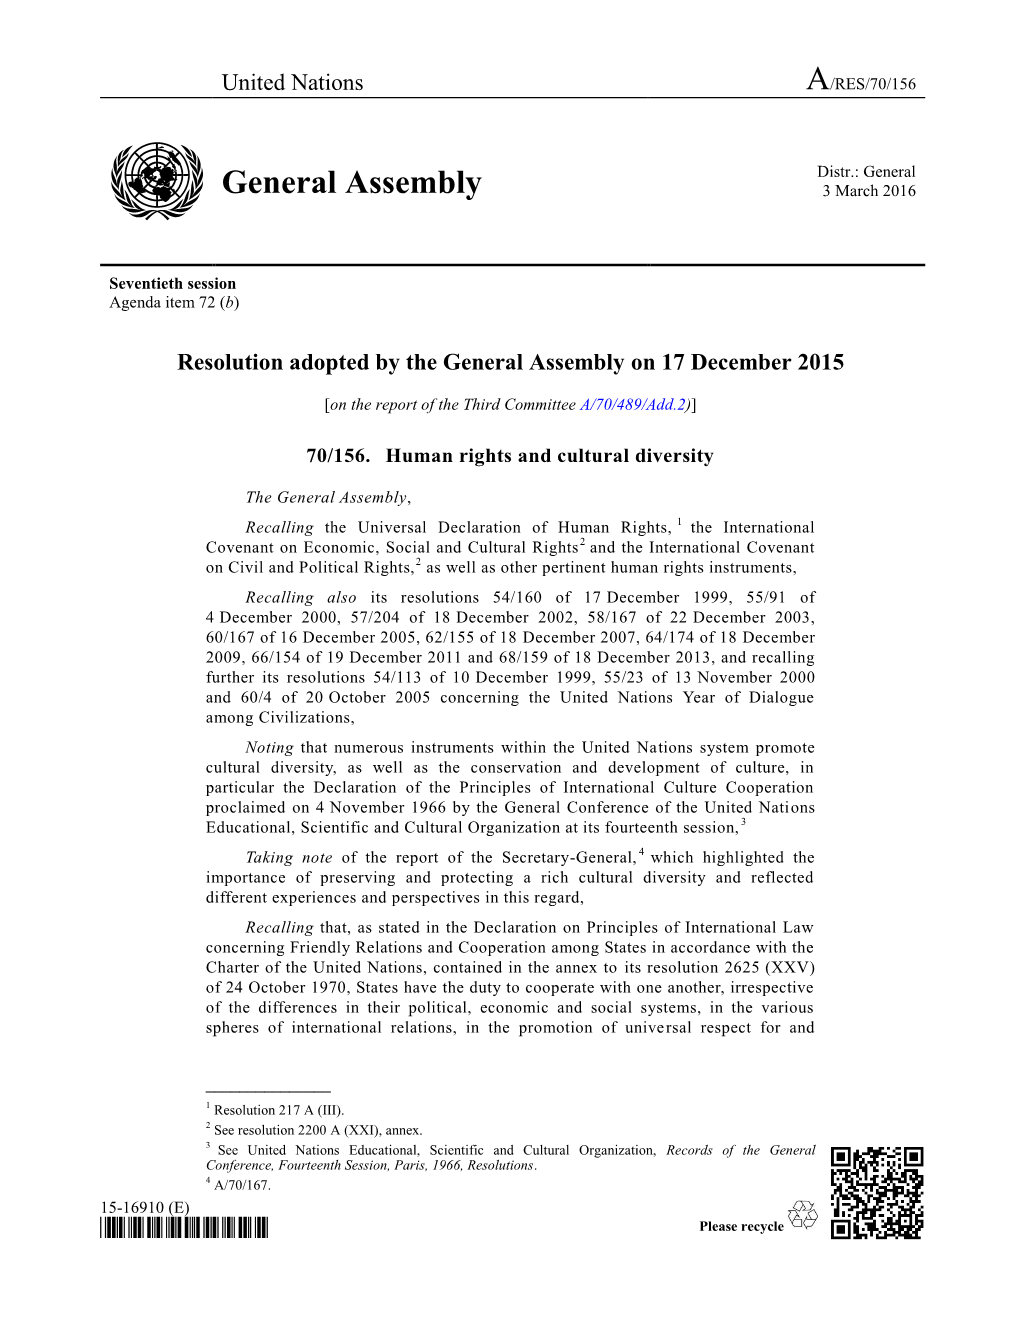 General Assembly 3 March 2016